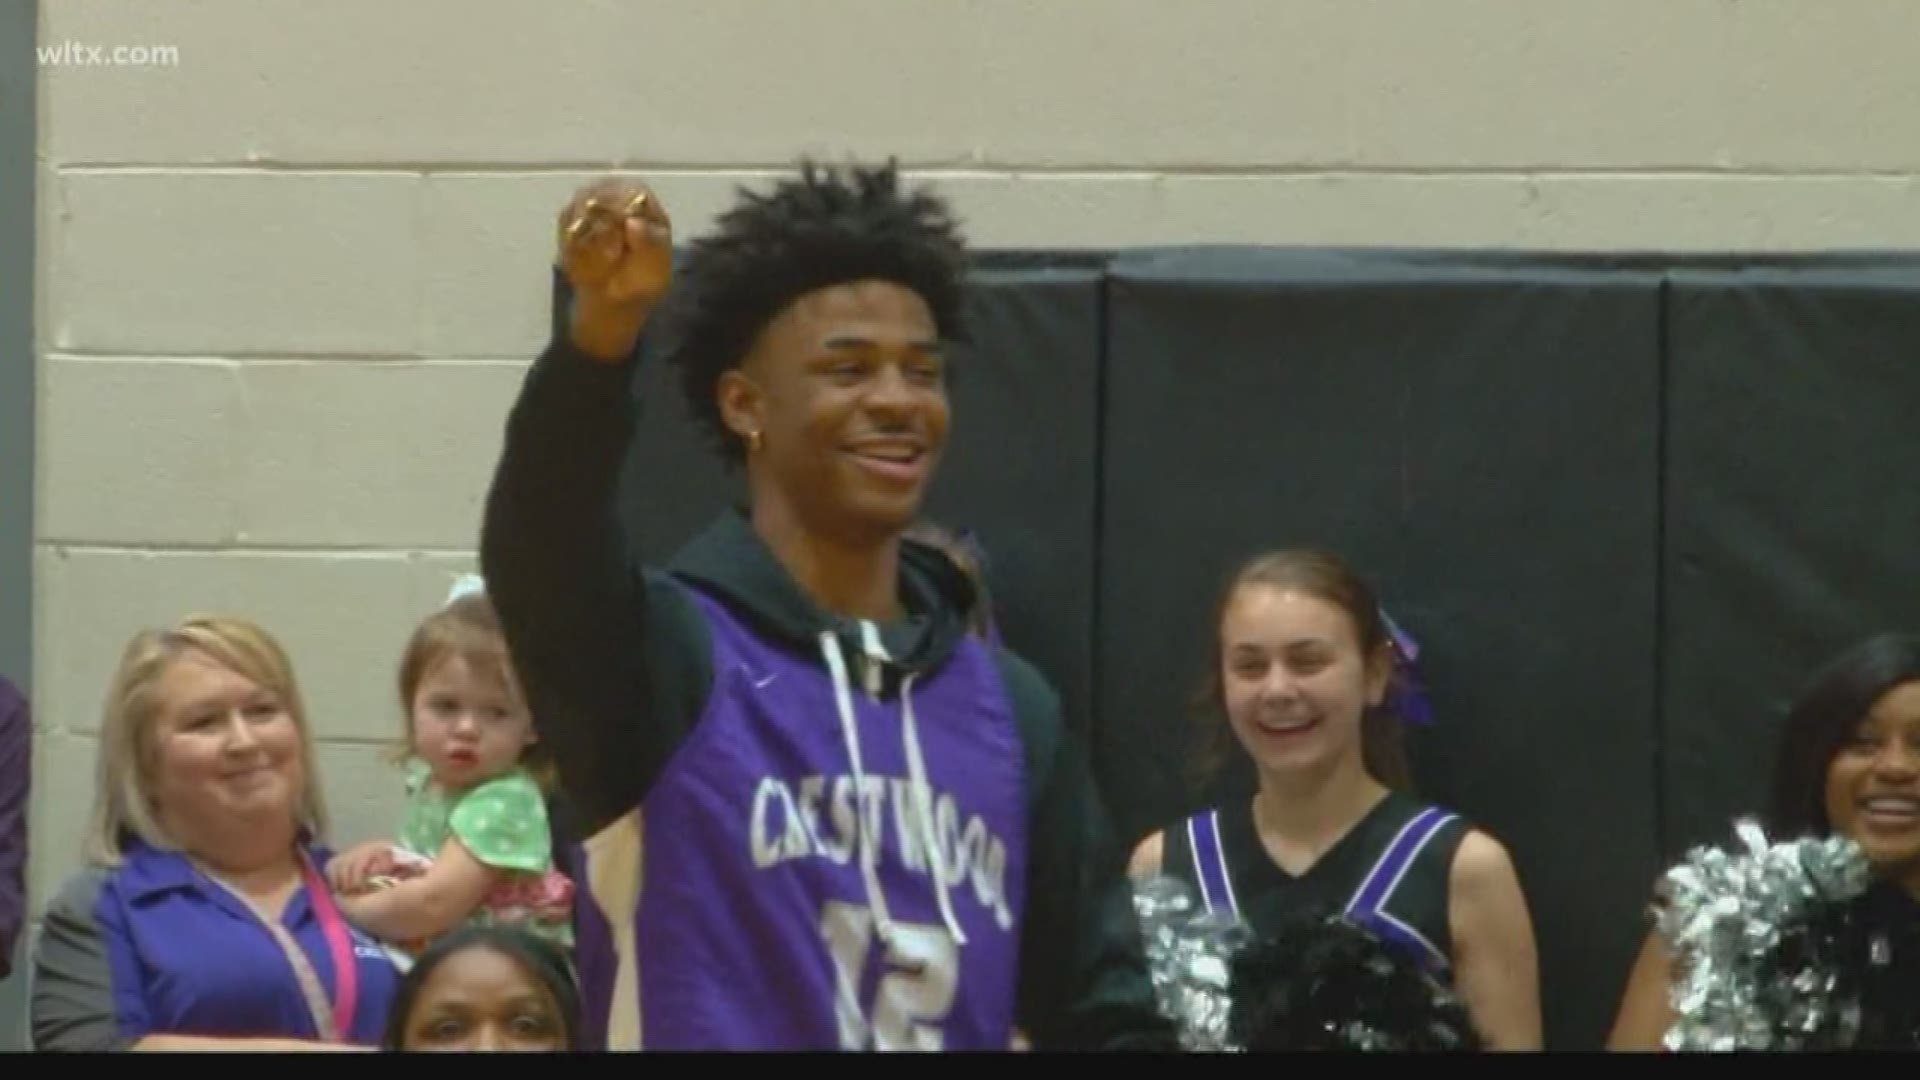 Future NBA lottery pick Ja Morant was back home Monday where he had his own "day"